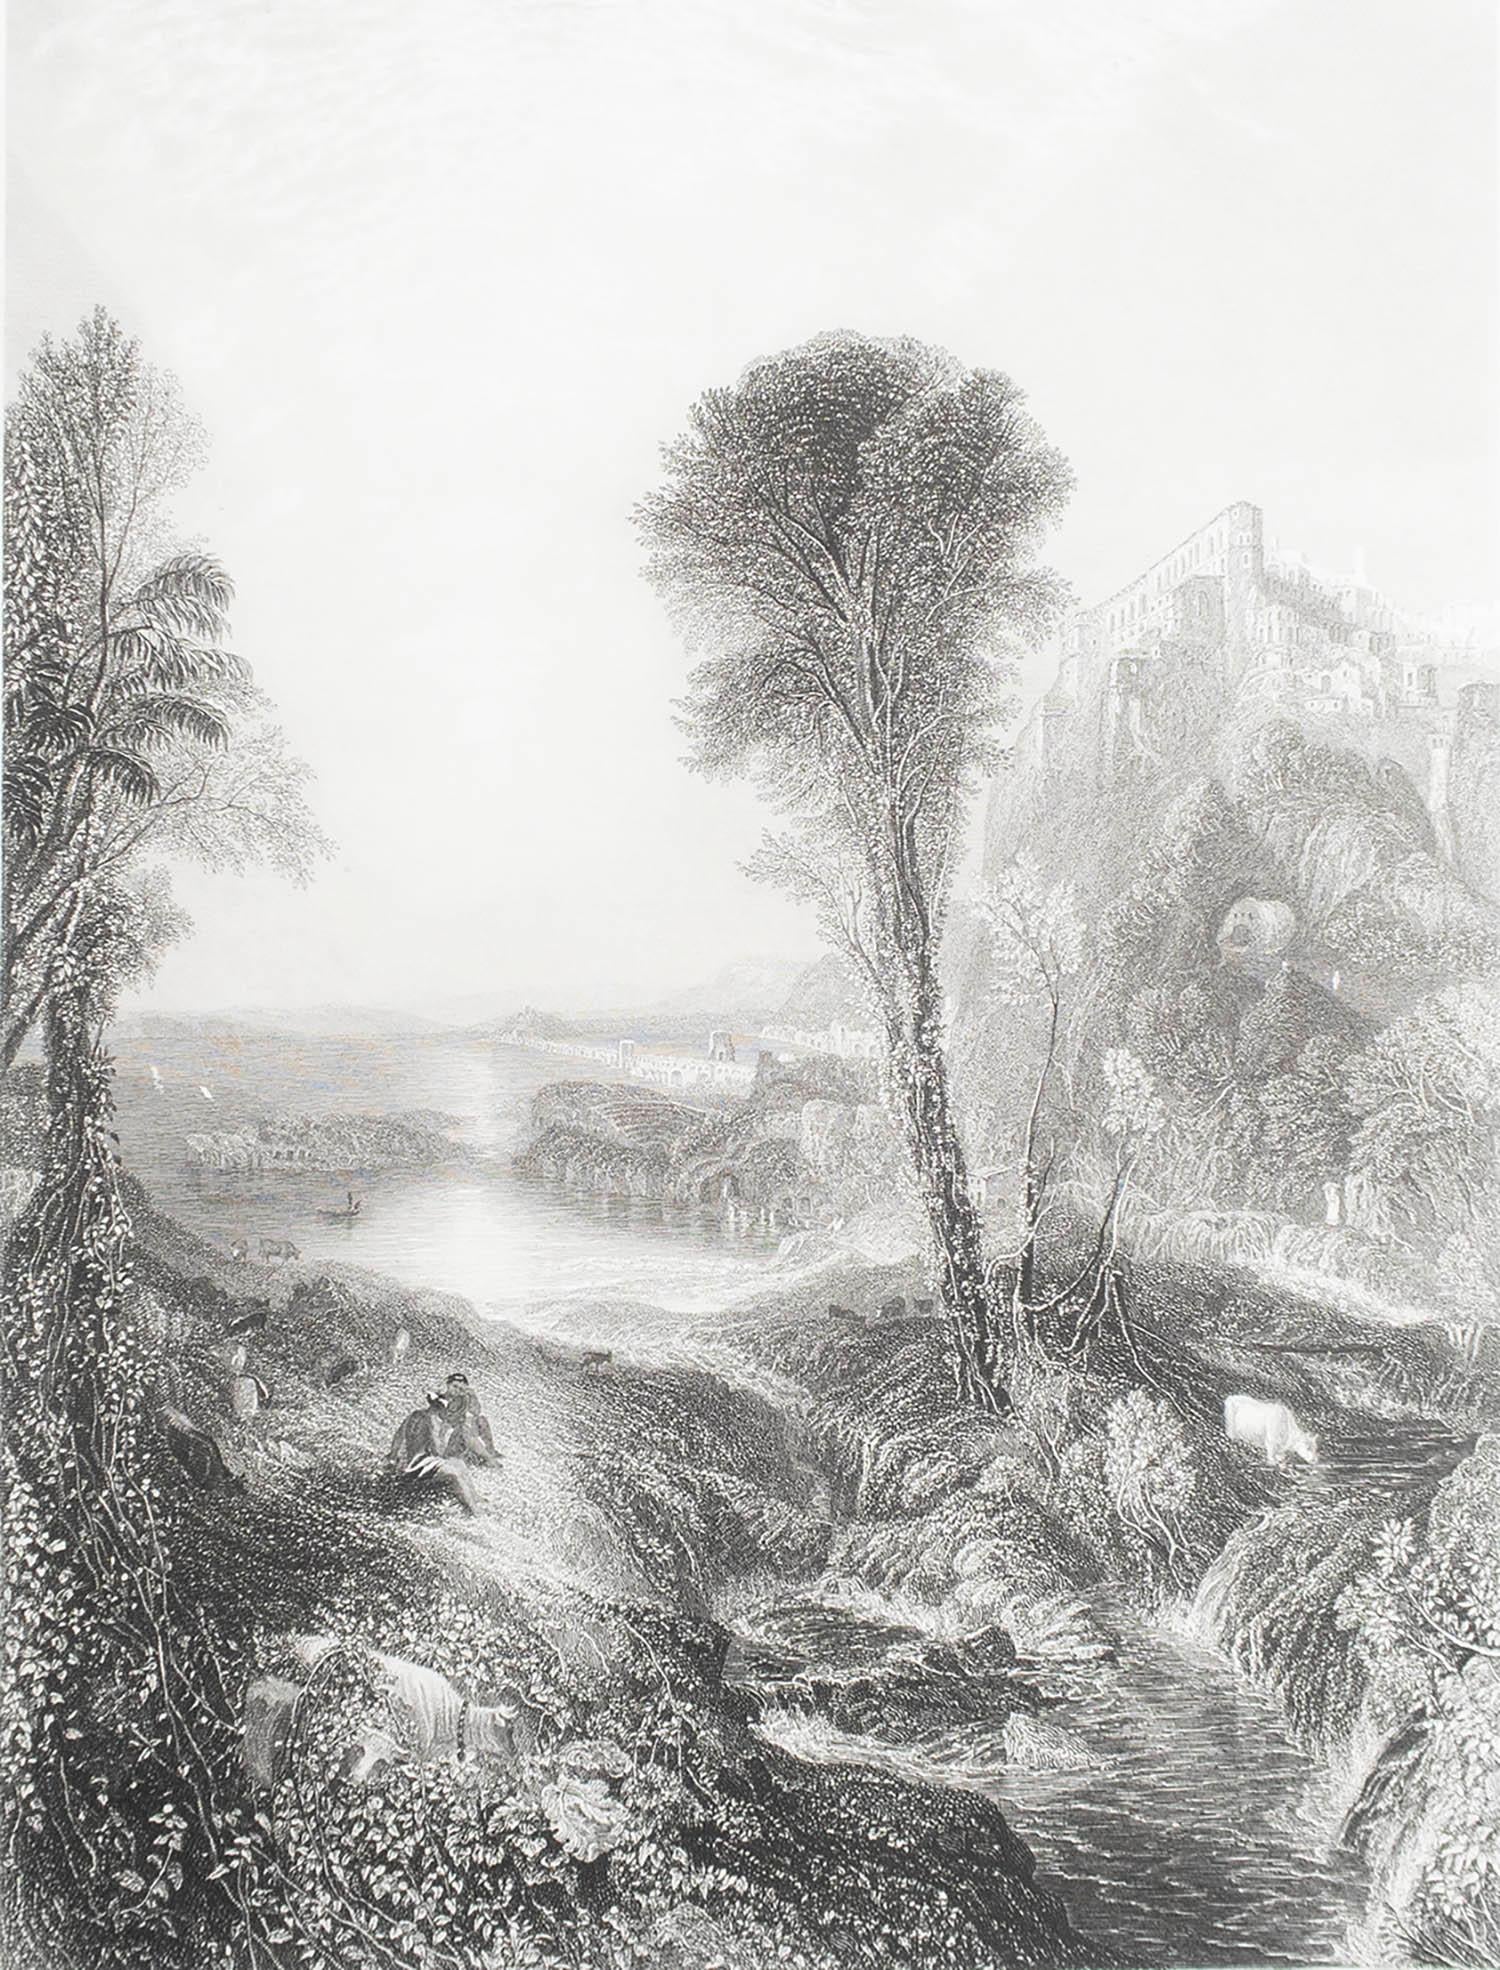 Great image after J.M.W Turner

Fine steel engraving 

Published by Virtue, C.1850

Unframed.

Free shipping